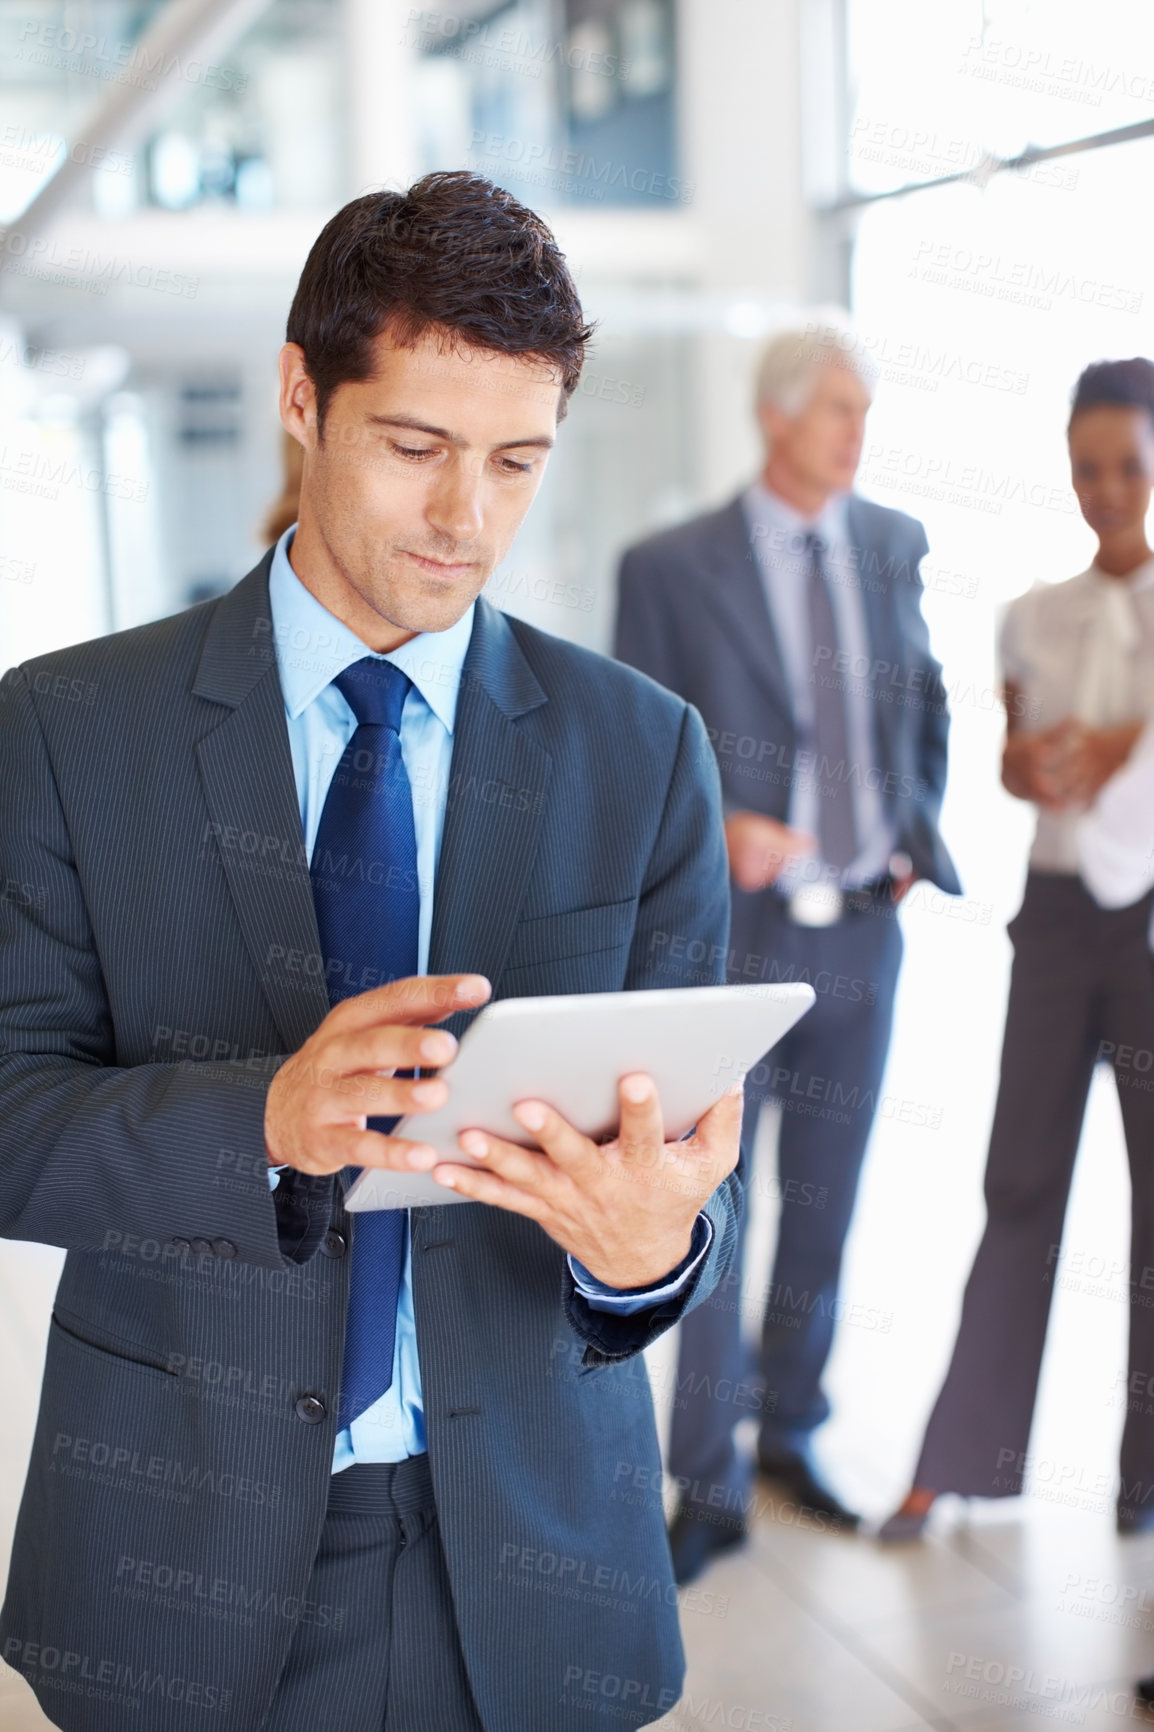 Buy stock photo Portrait of handsome business man using electronic tablet with executives in background